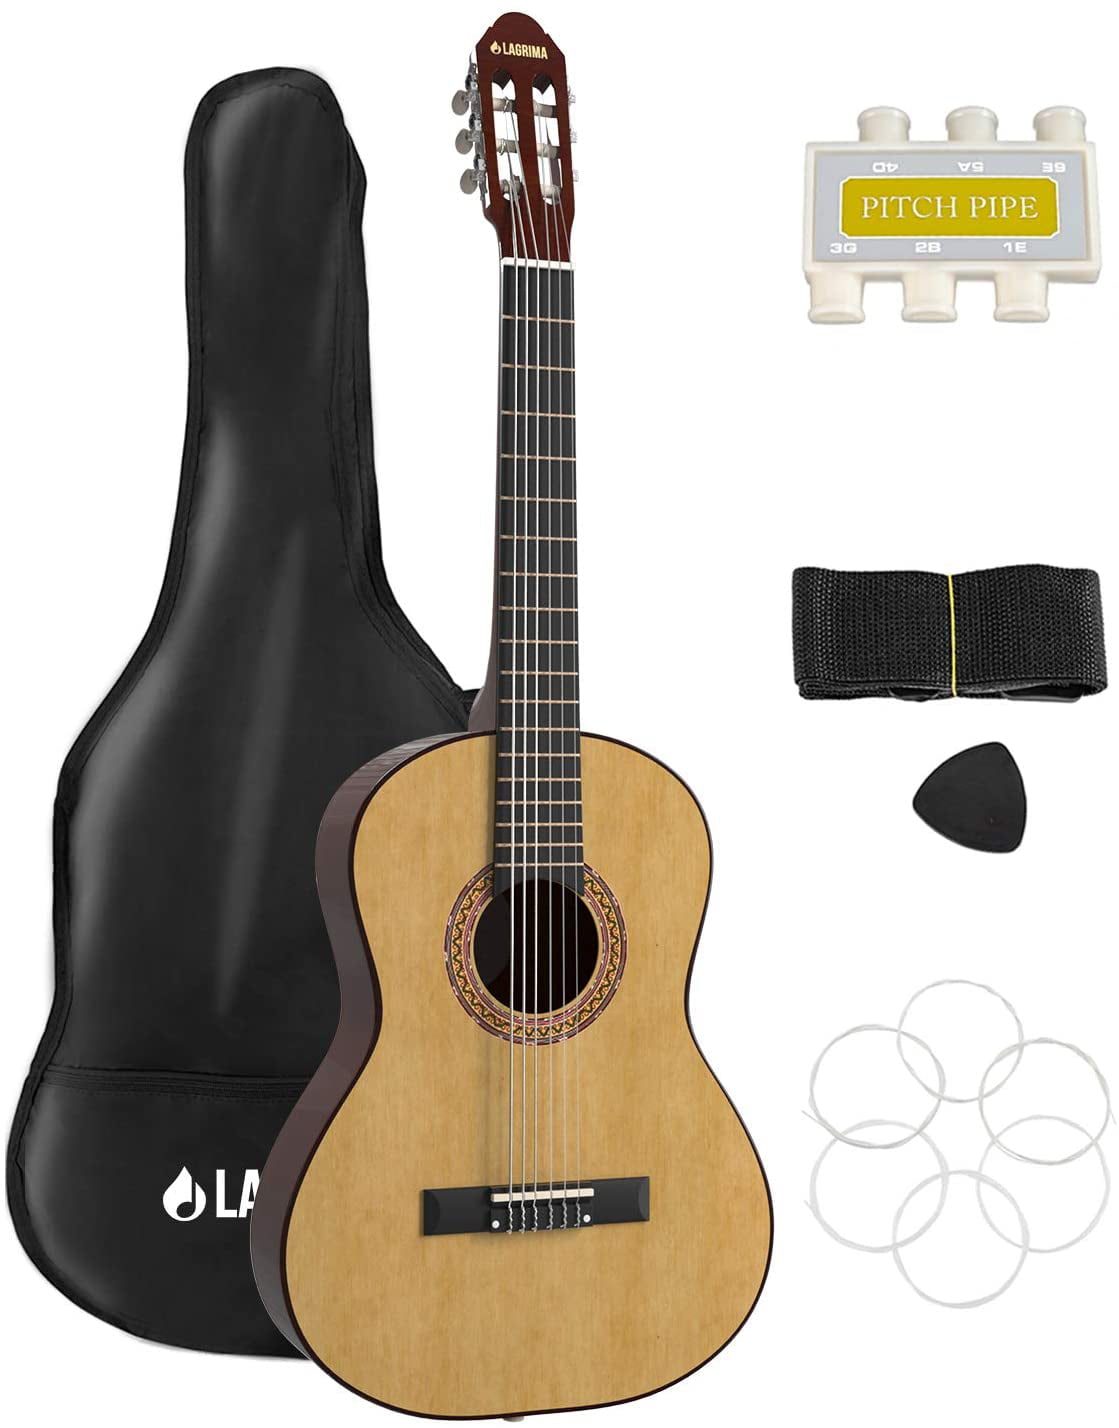 Sunset HUAWIND Dreadnought Small Acoustic Kids Guitar for Beginner 30 1/2 Half-Size Steel Strings Wooden Guitar with Gig Bag